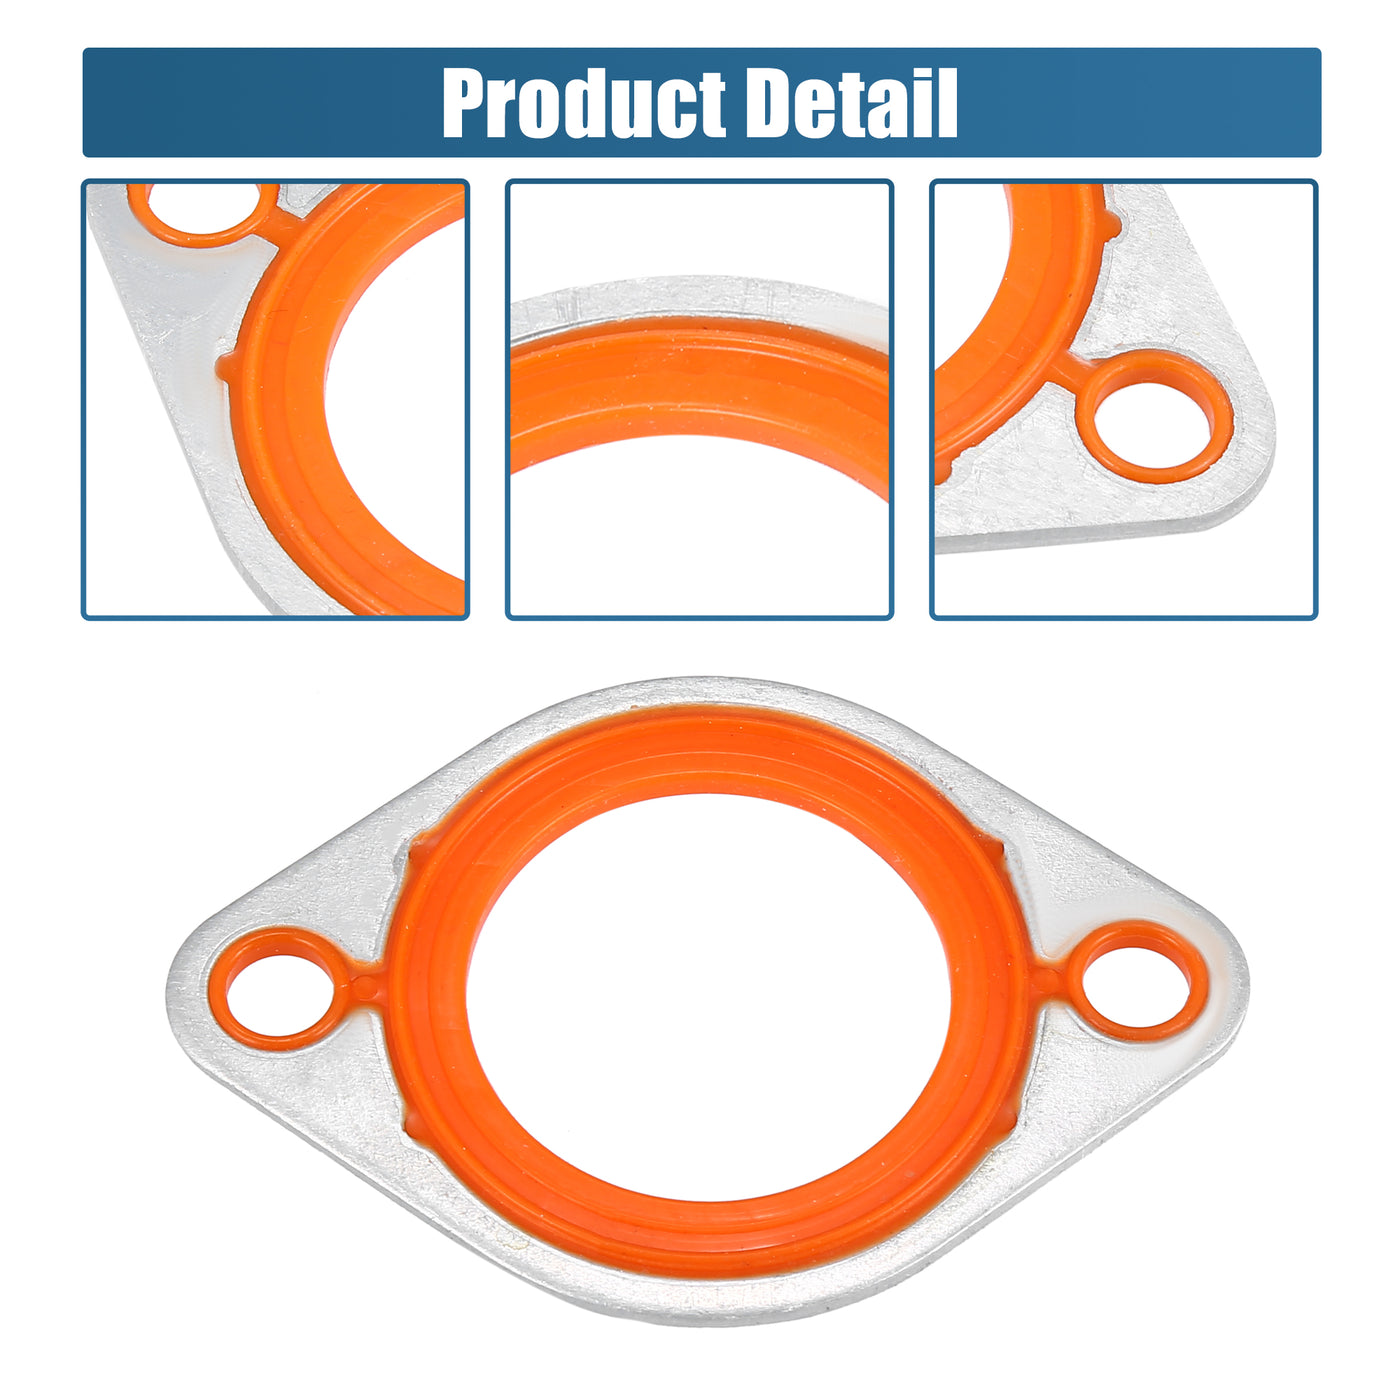 X AUTOHAUX Aluminum Silicone Thermostat Water Neck Thermostat Housing Gasket Seal Replacement for Chevy SBC BBC 265 283 305 327 350 383 396 400 427 454 472 500